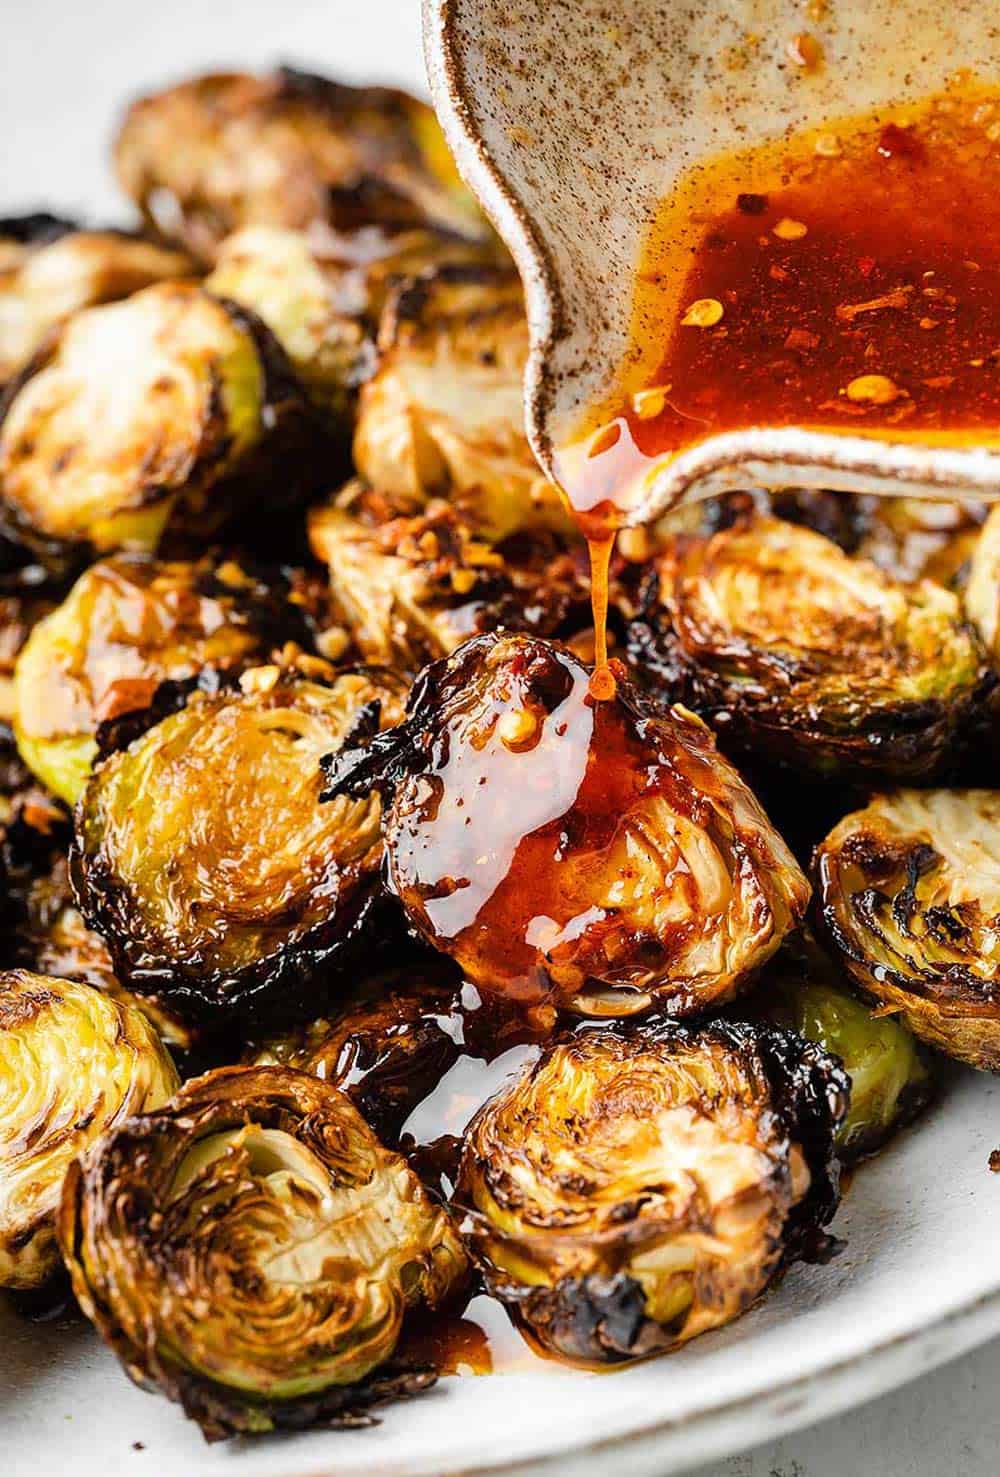 Pouring sauce over a dish of crispy, golden-brown Brussels sprouts. The sauce is drizzling evenly, adding a glossy sheen to the roasted sprouts.